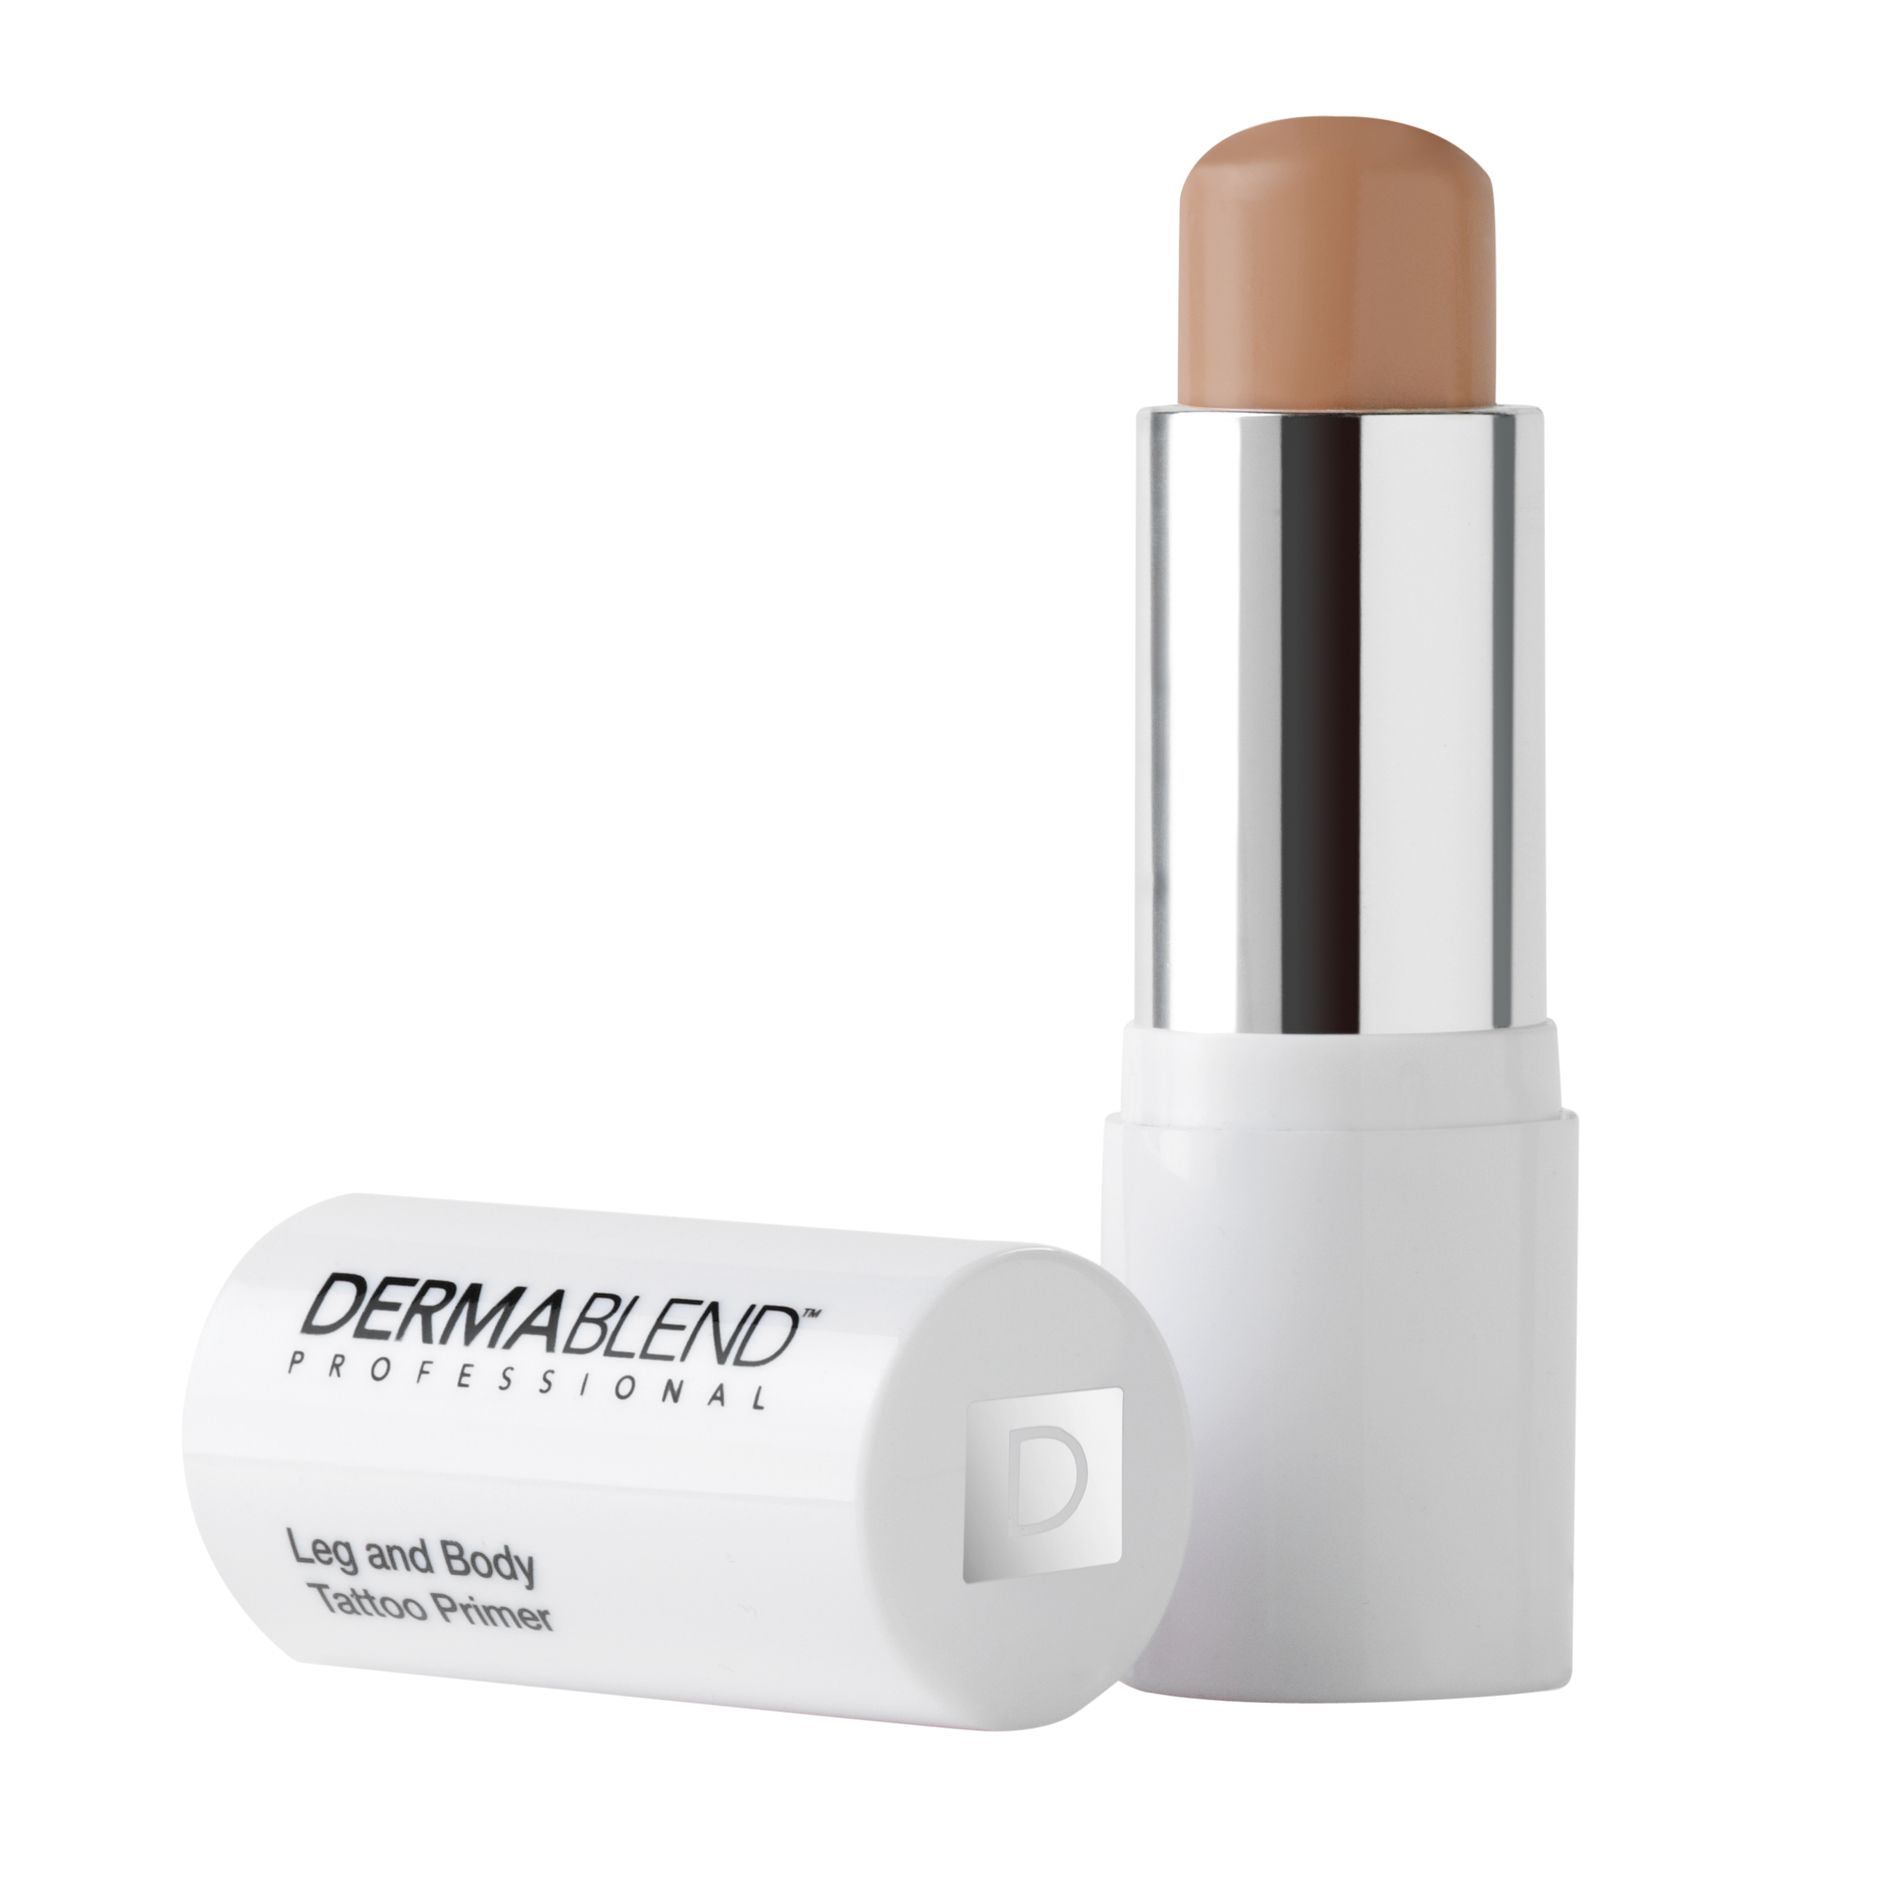 Dermablend Leg and Body Tattoo Primer